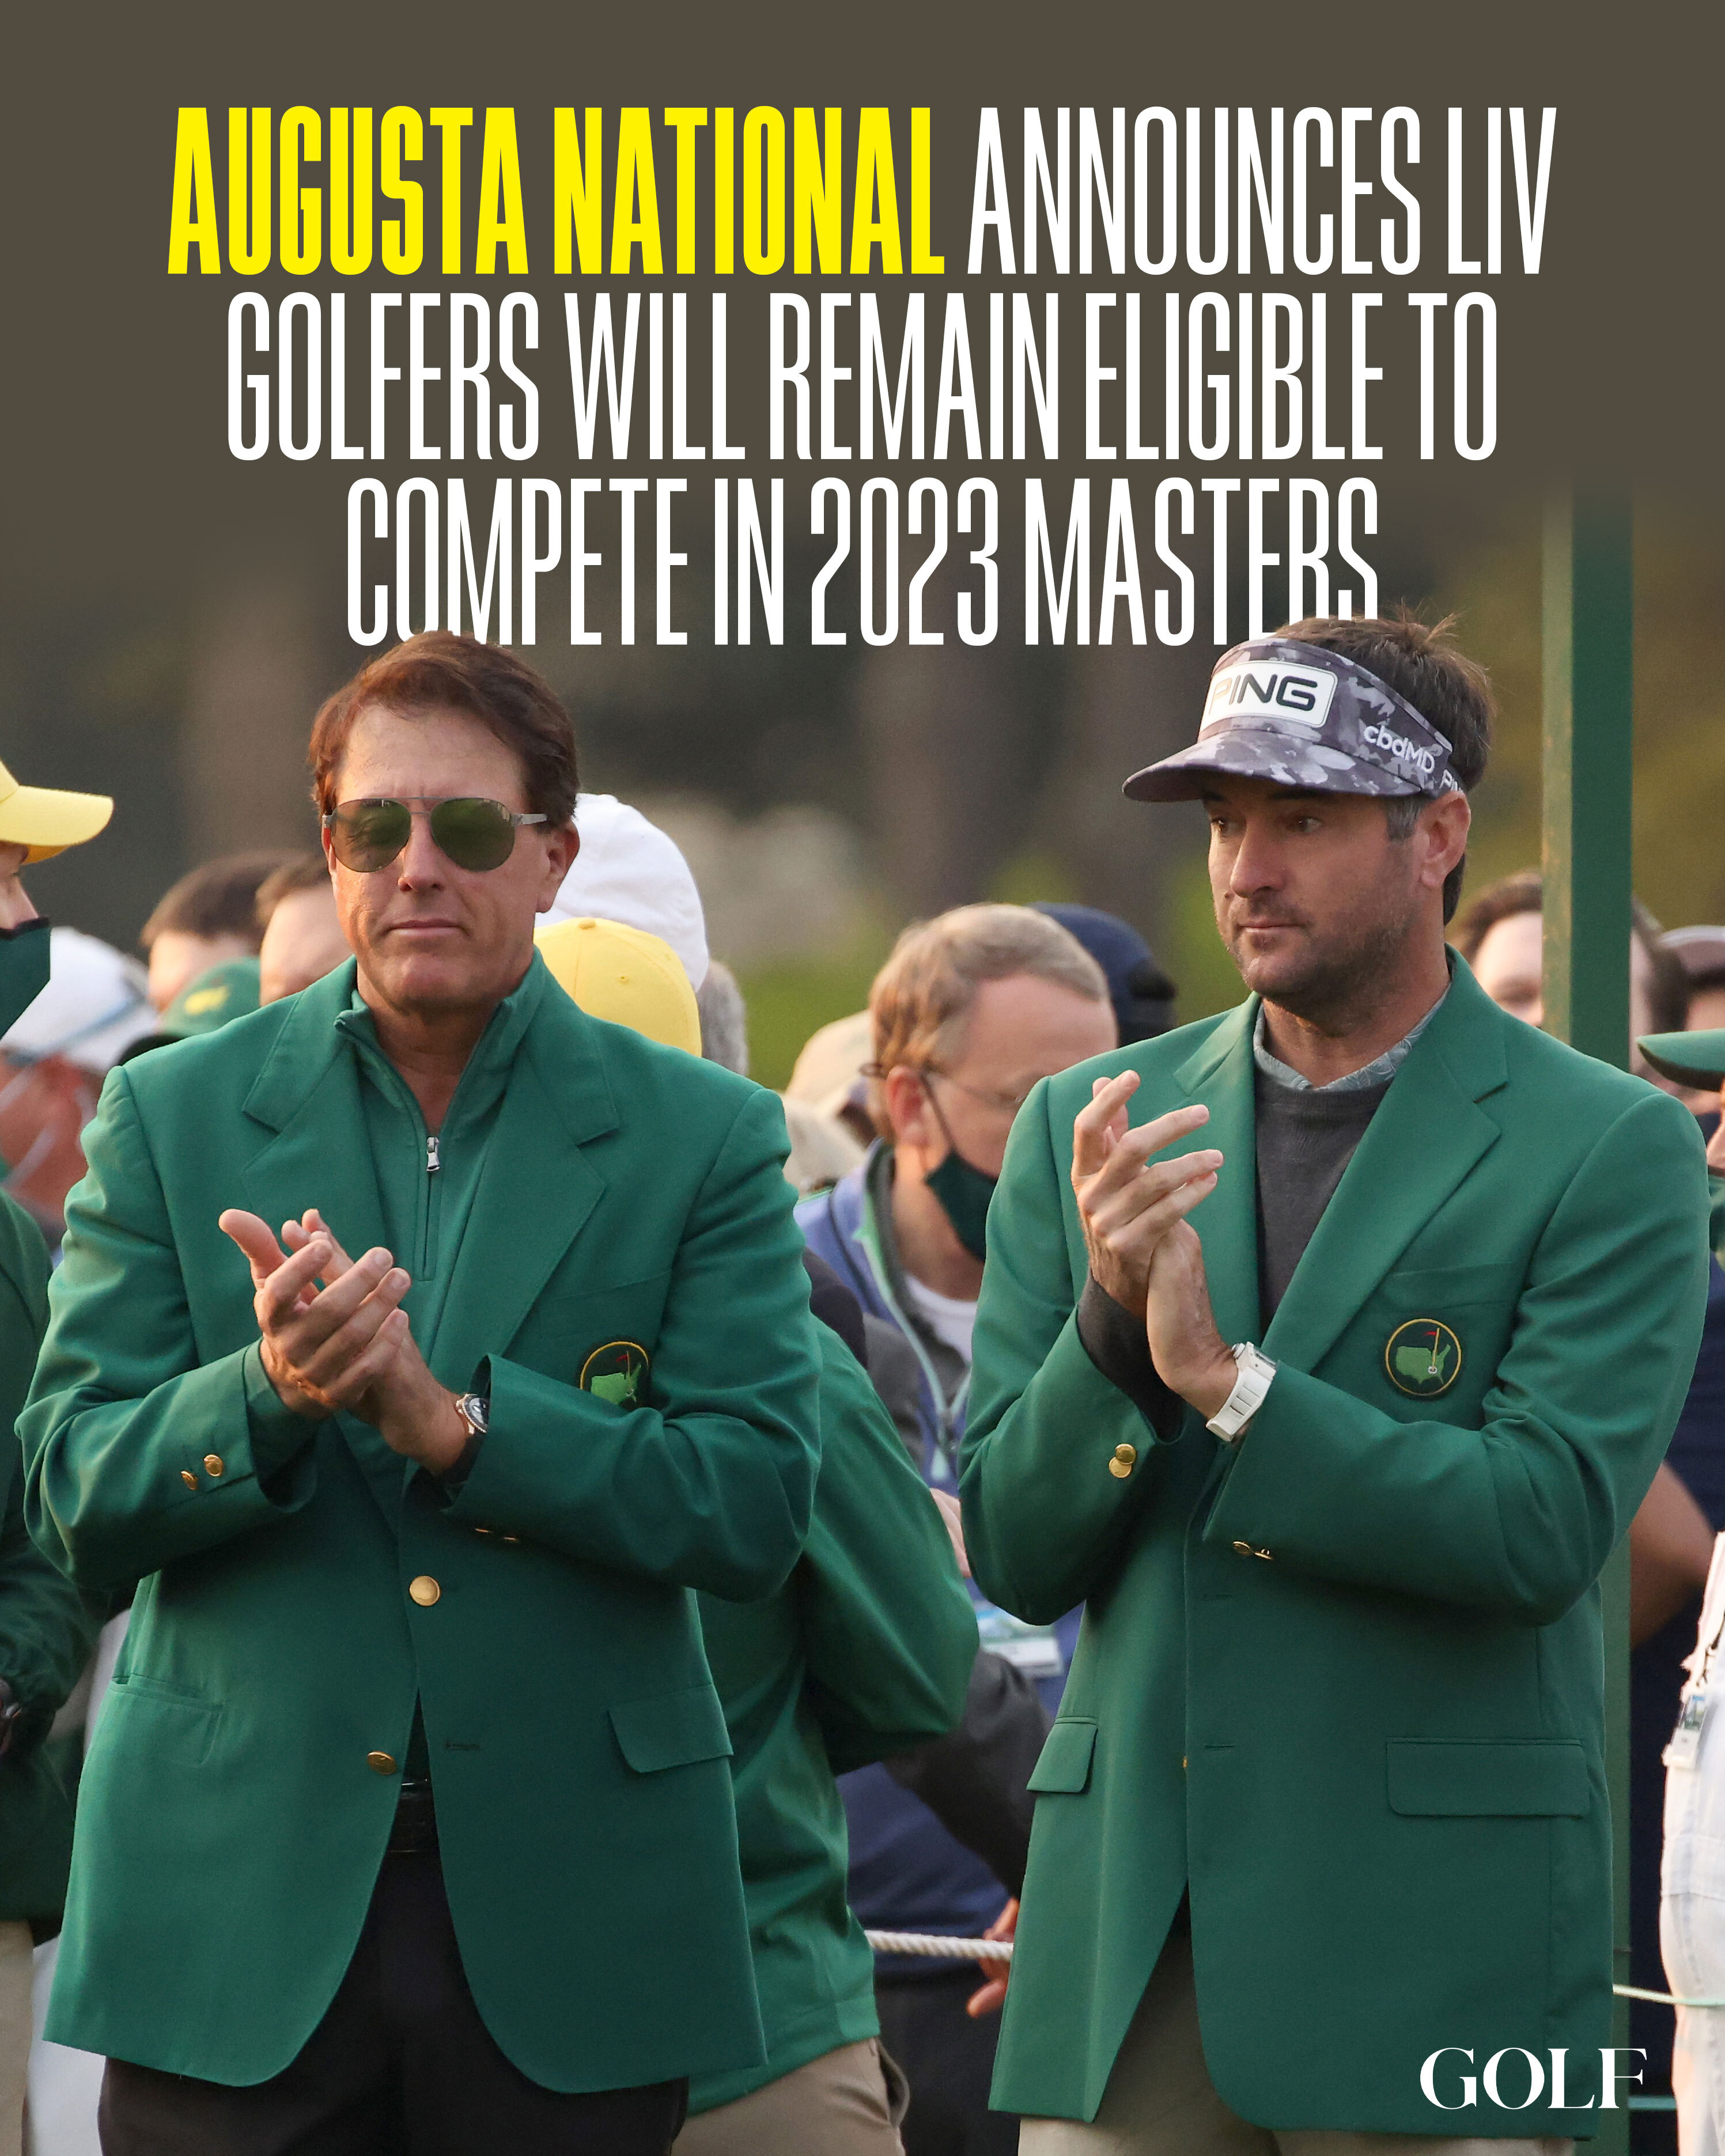 Augusta National confirms LIV Golfers will participate in 2023 Masters Tournament